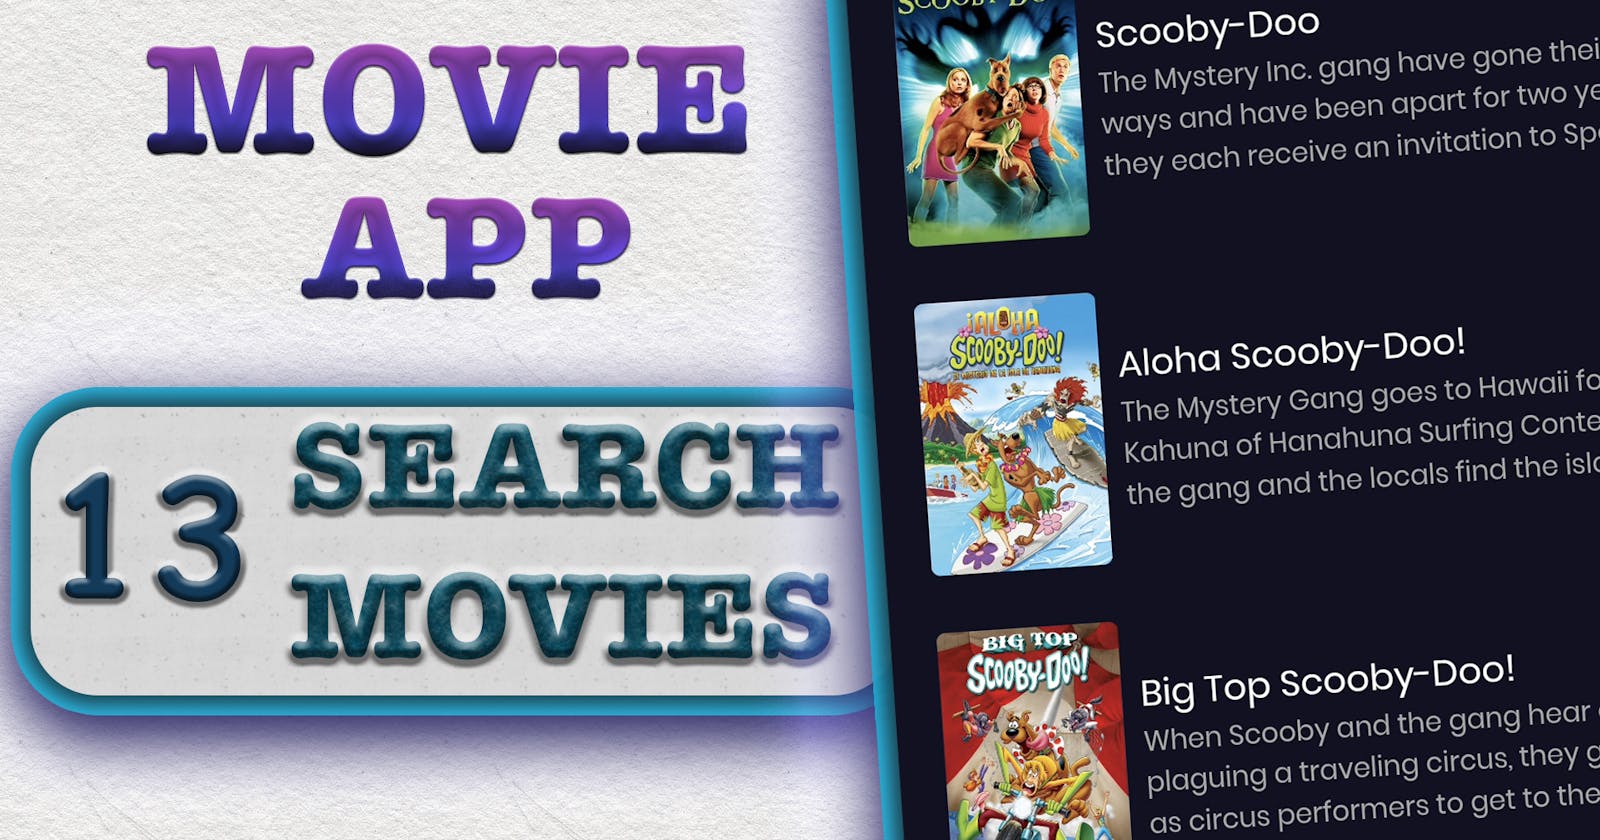 13. Search Movies